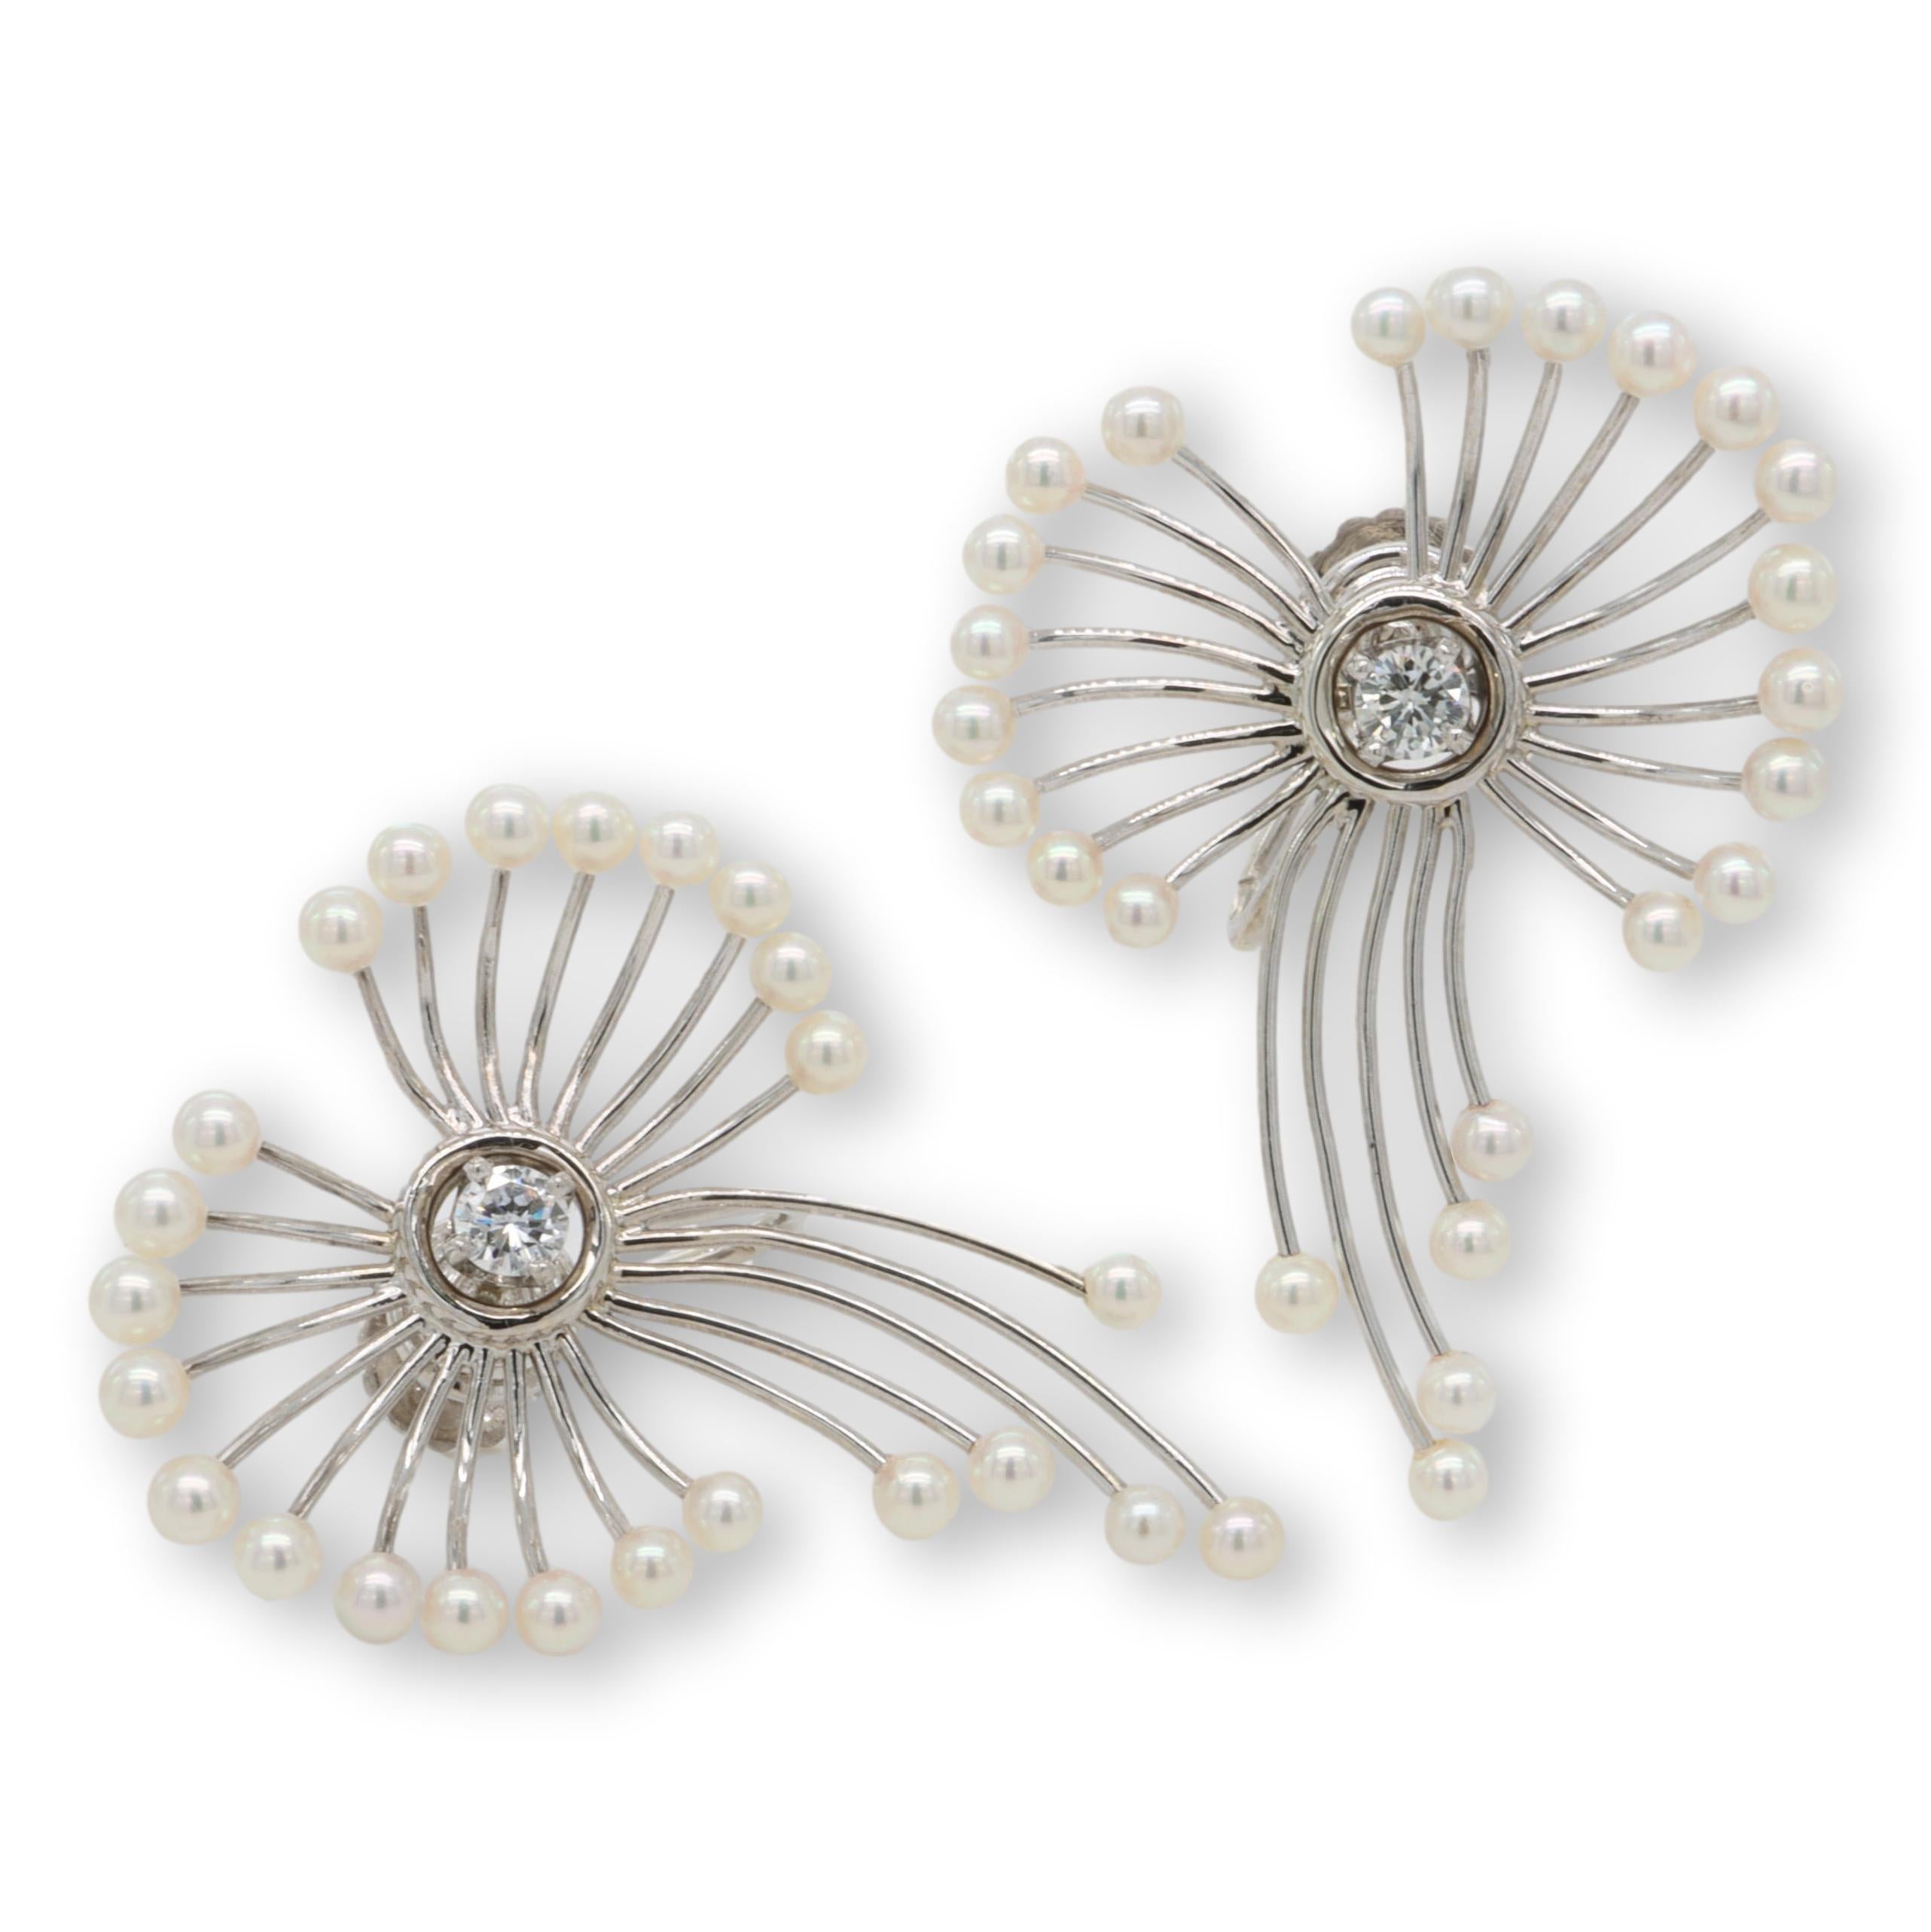 Vintage pair of earrings finely crafted in 14 Karat white gold featuring 2 center round brilliant cut eye-clean diamonds adorned with 48 Akoya 2.6-2.8 mm seed pearls with pink luster in an open flower shape design. Both earrings have vintage screw